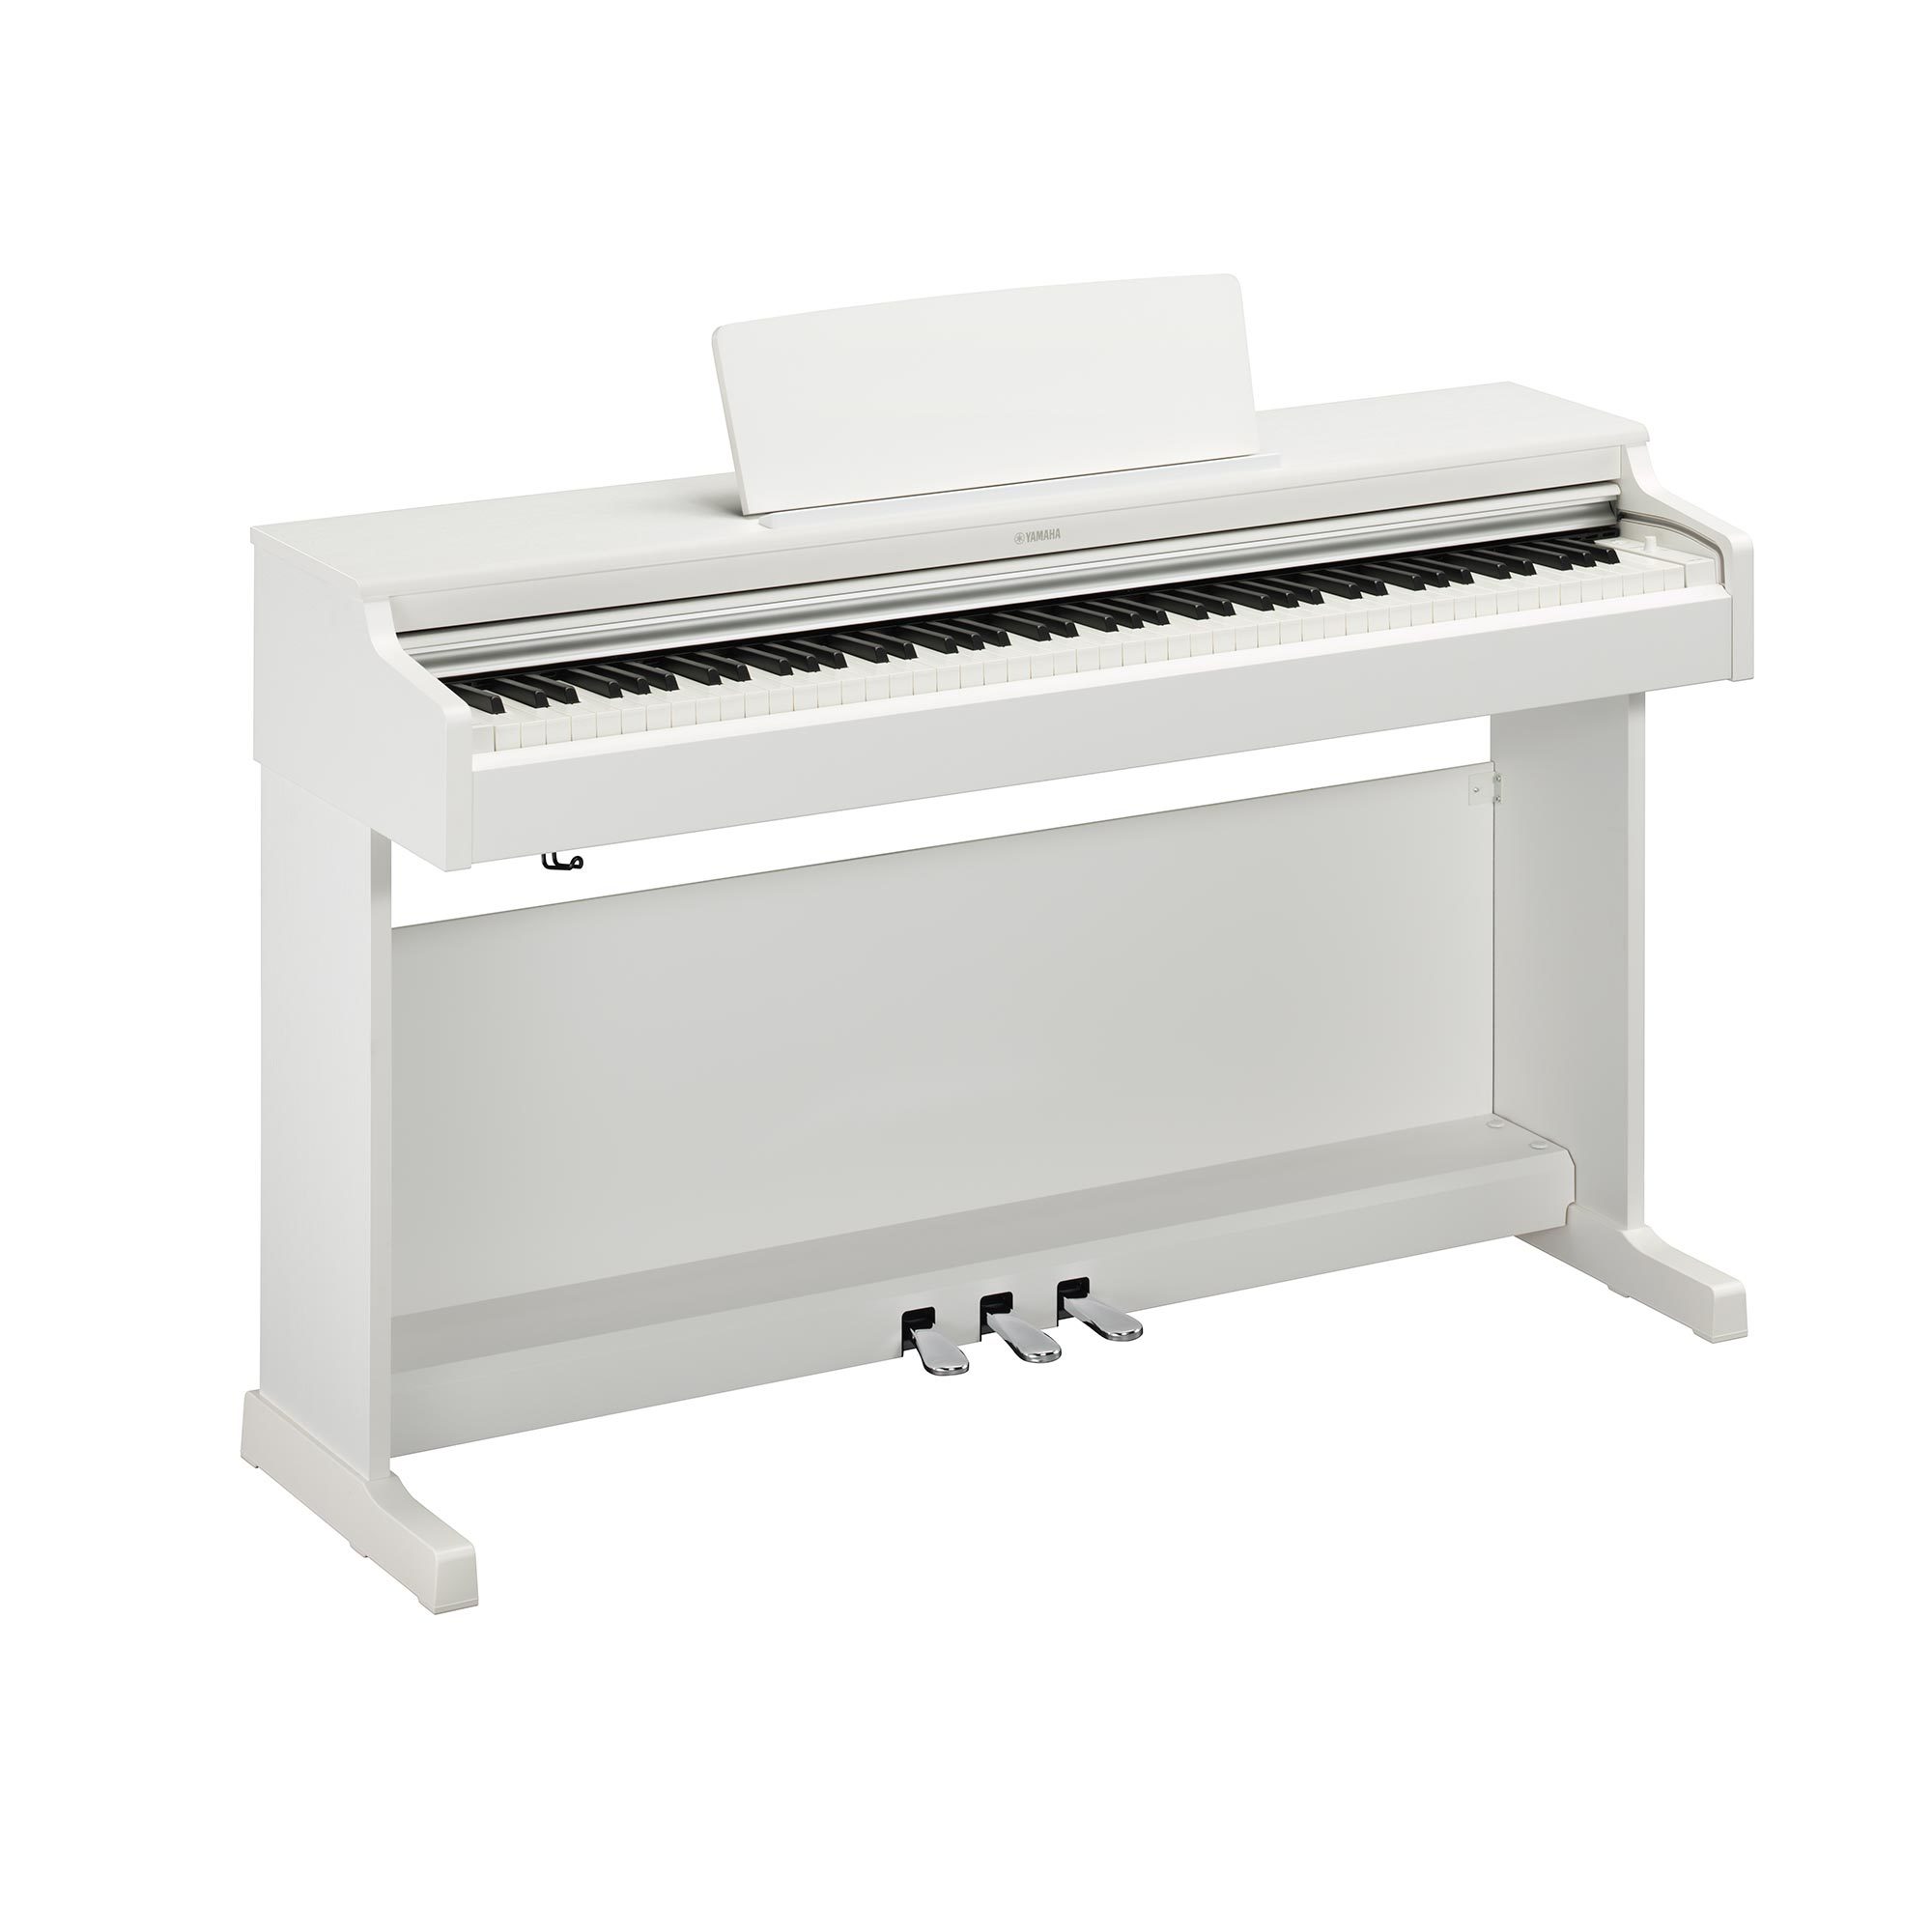 YDP-165 - Overview - ARIUS - Pianos - Musical Instruments 